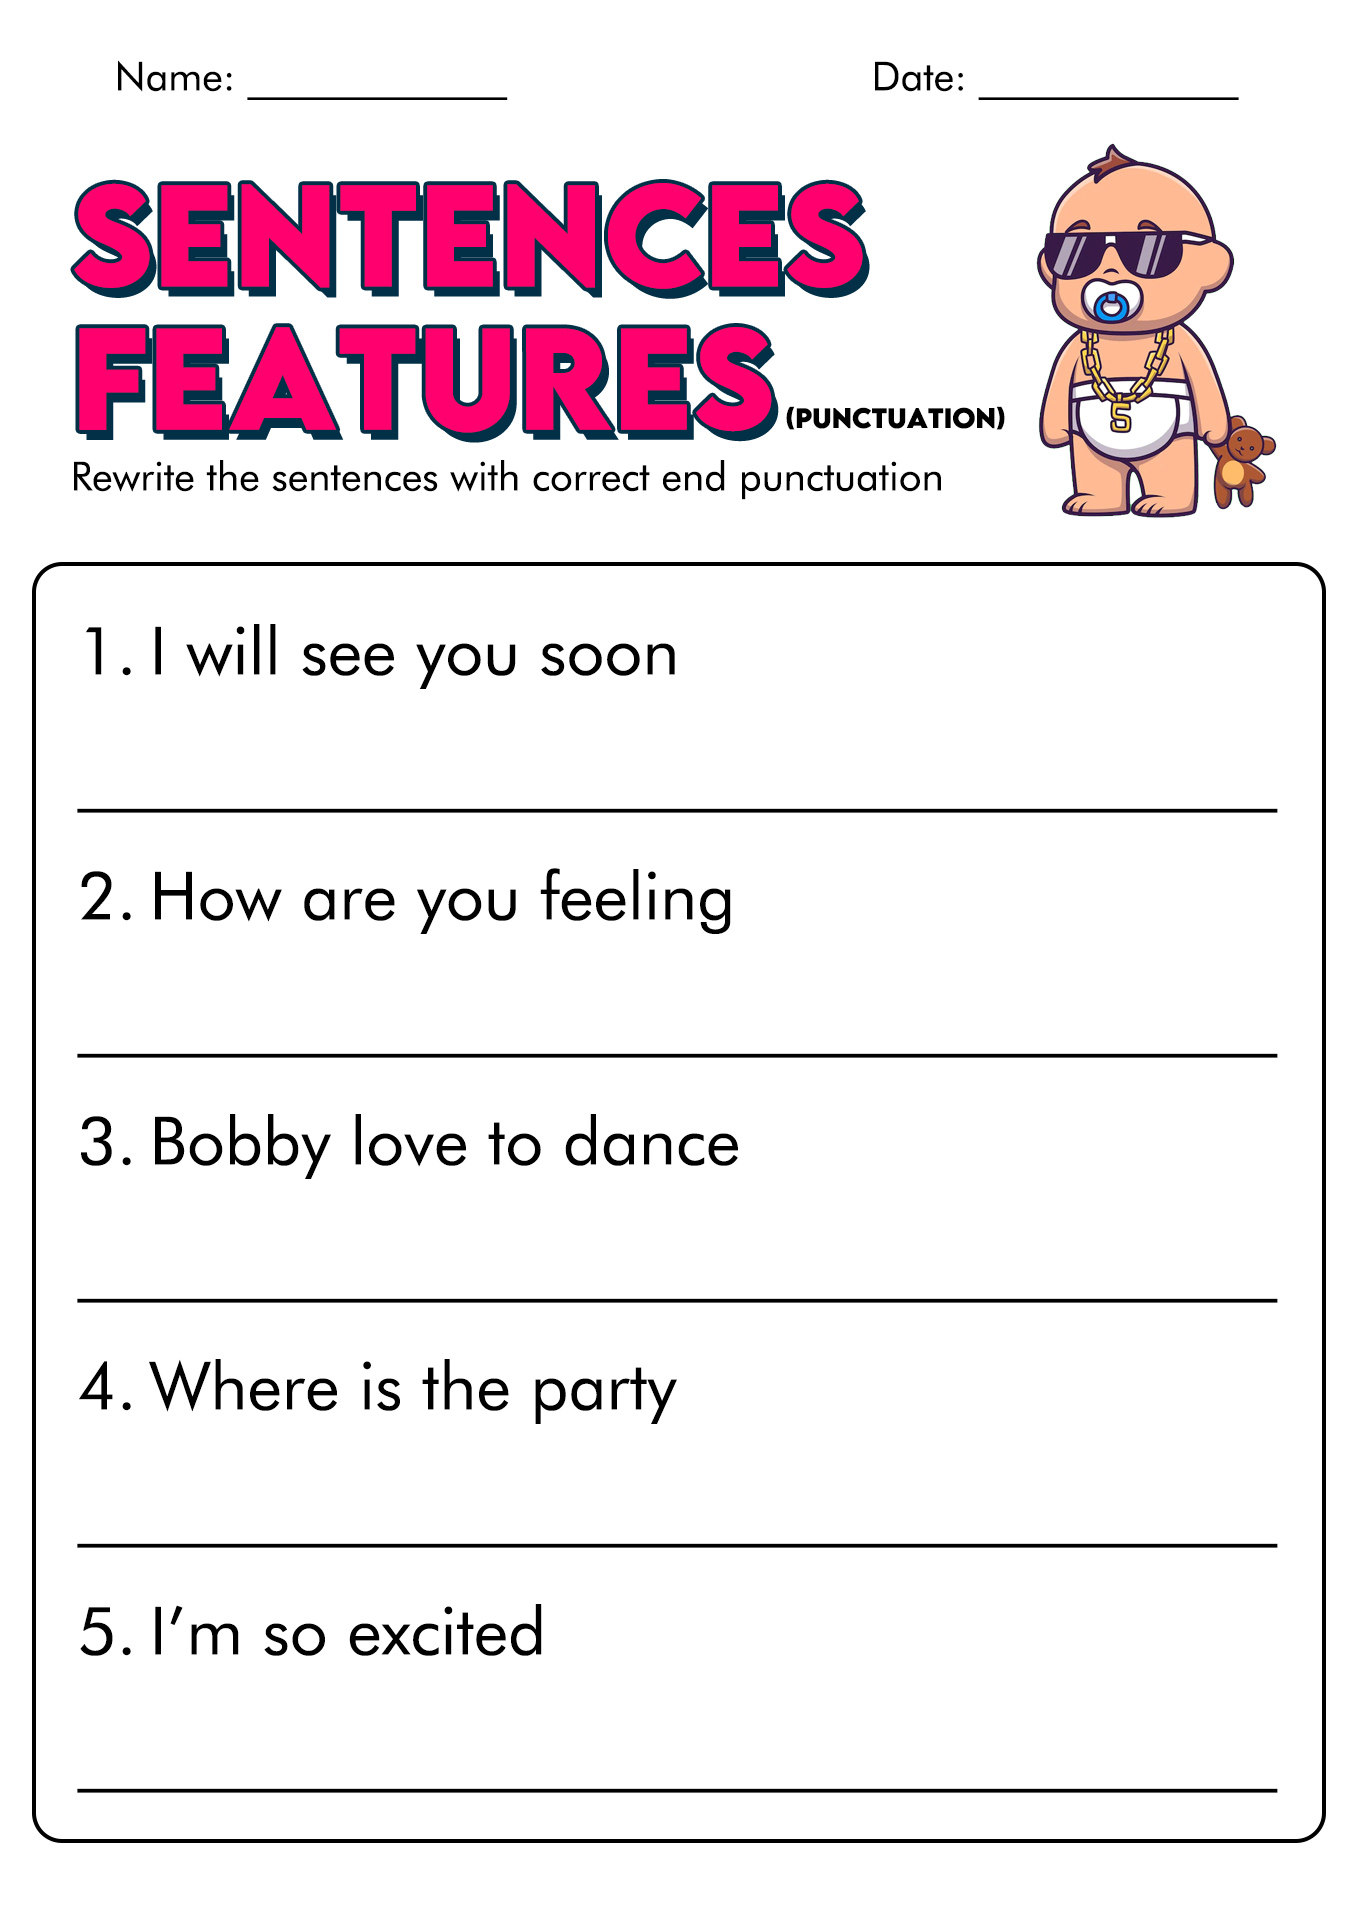 20-best-images-of-punctuation-worksheets-for-grade-5-5th-grade